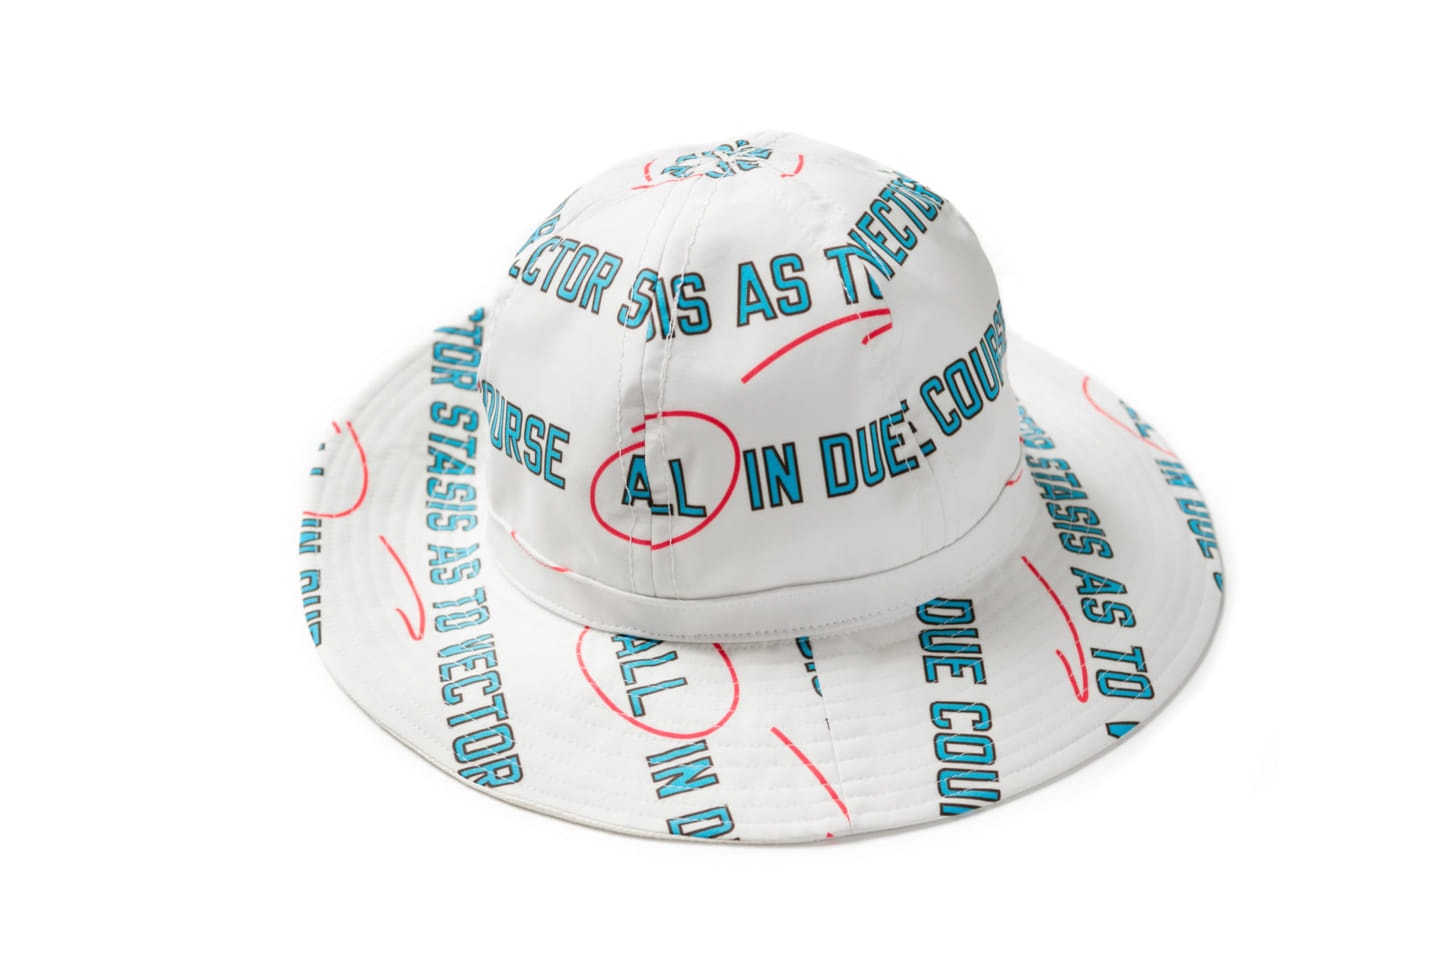 Sacai 2018 Pre-Spring 2018 Accessories Hat Cap Bucket Bag Print Lawrence Weiner Black White Collaboration